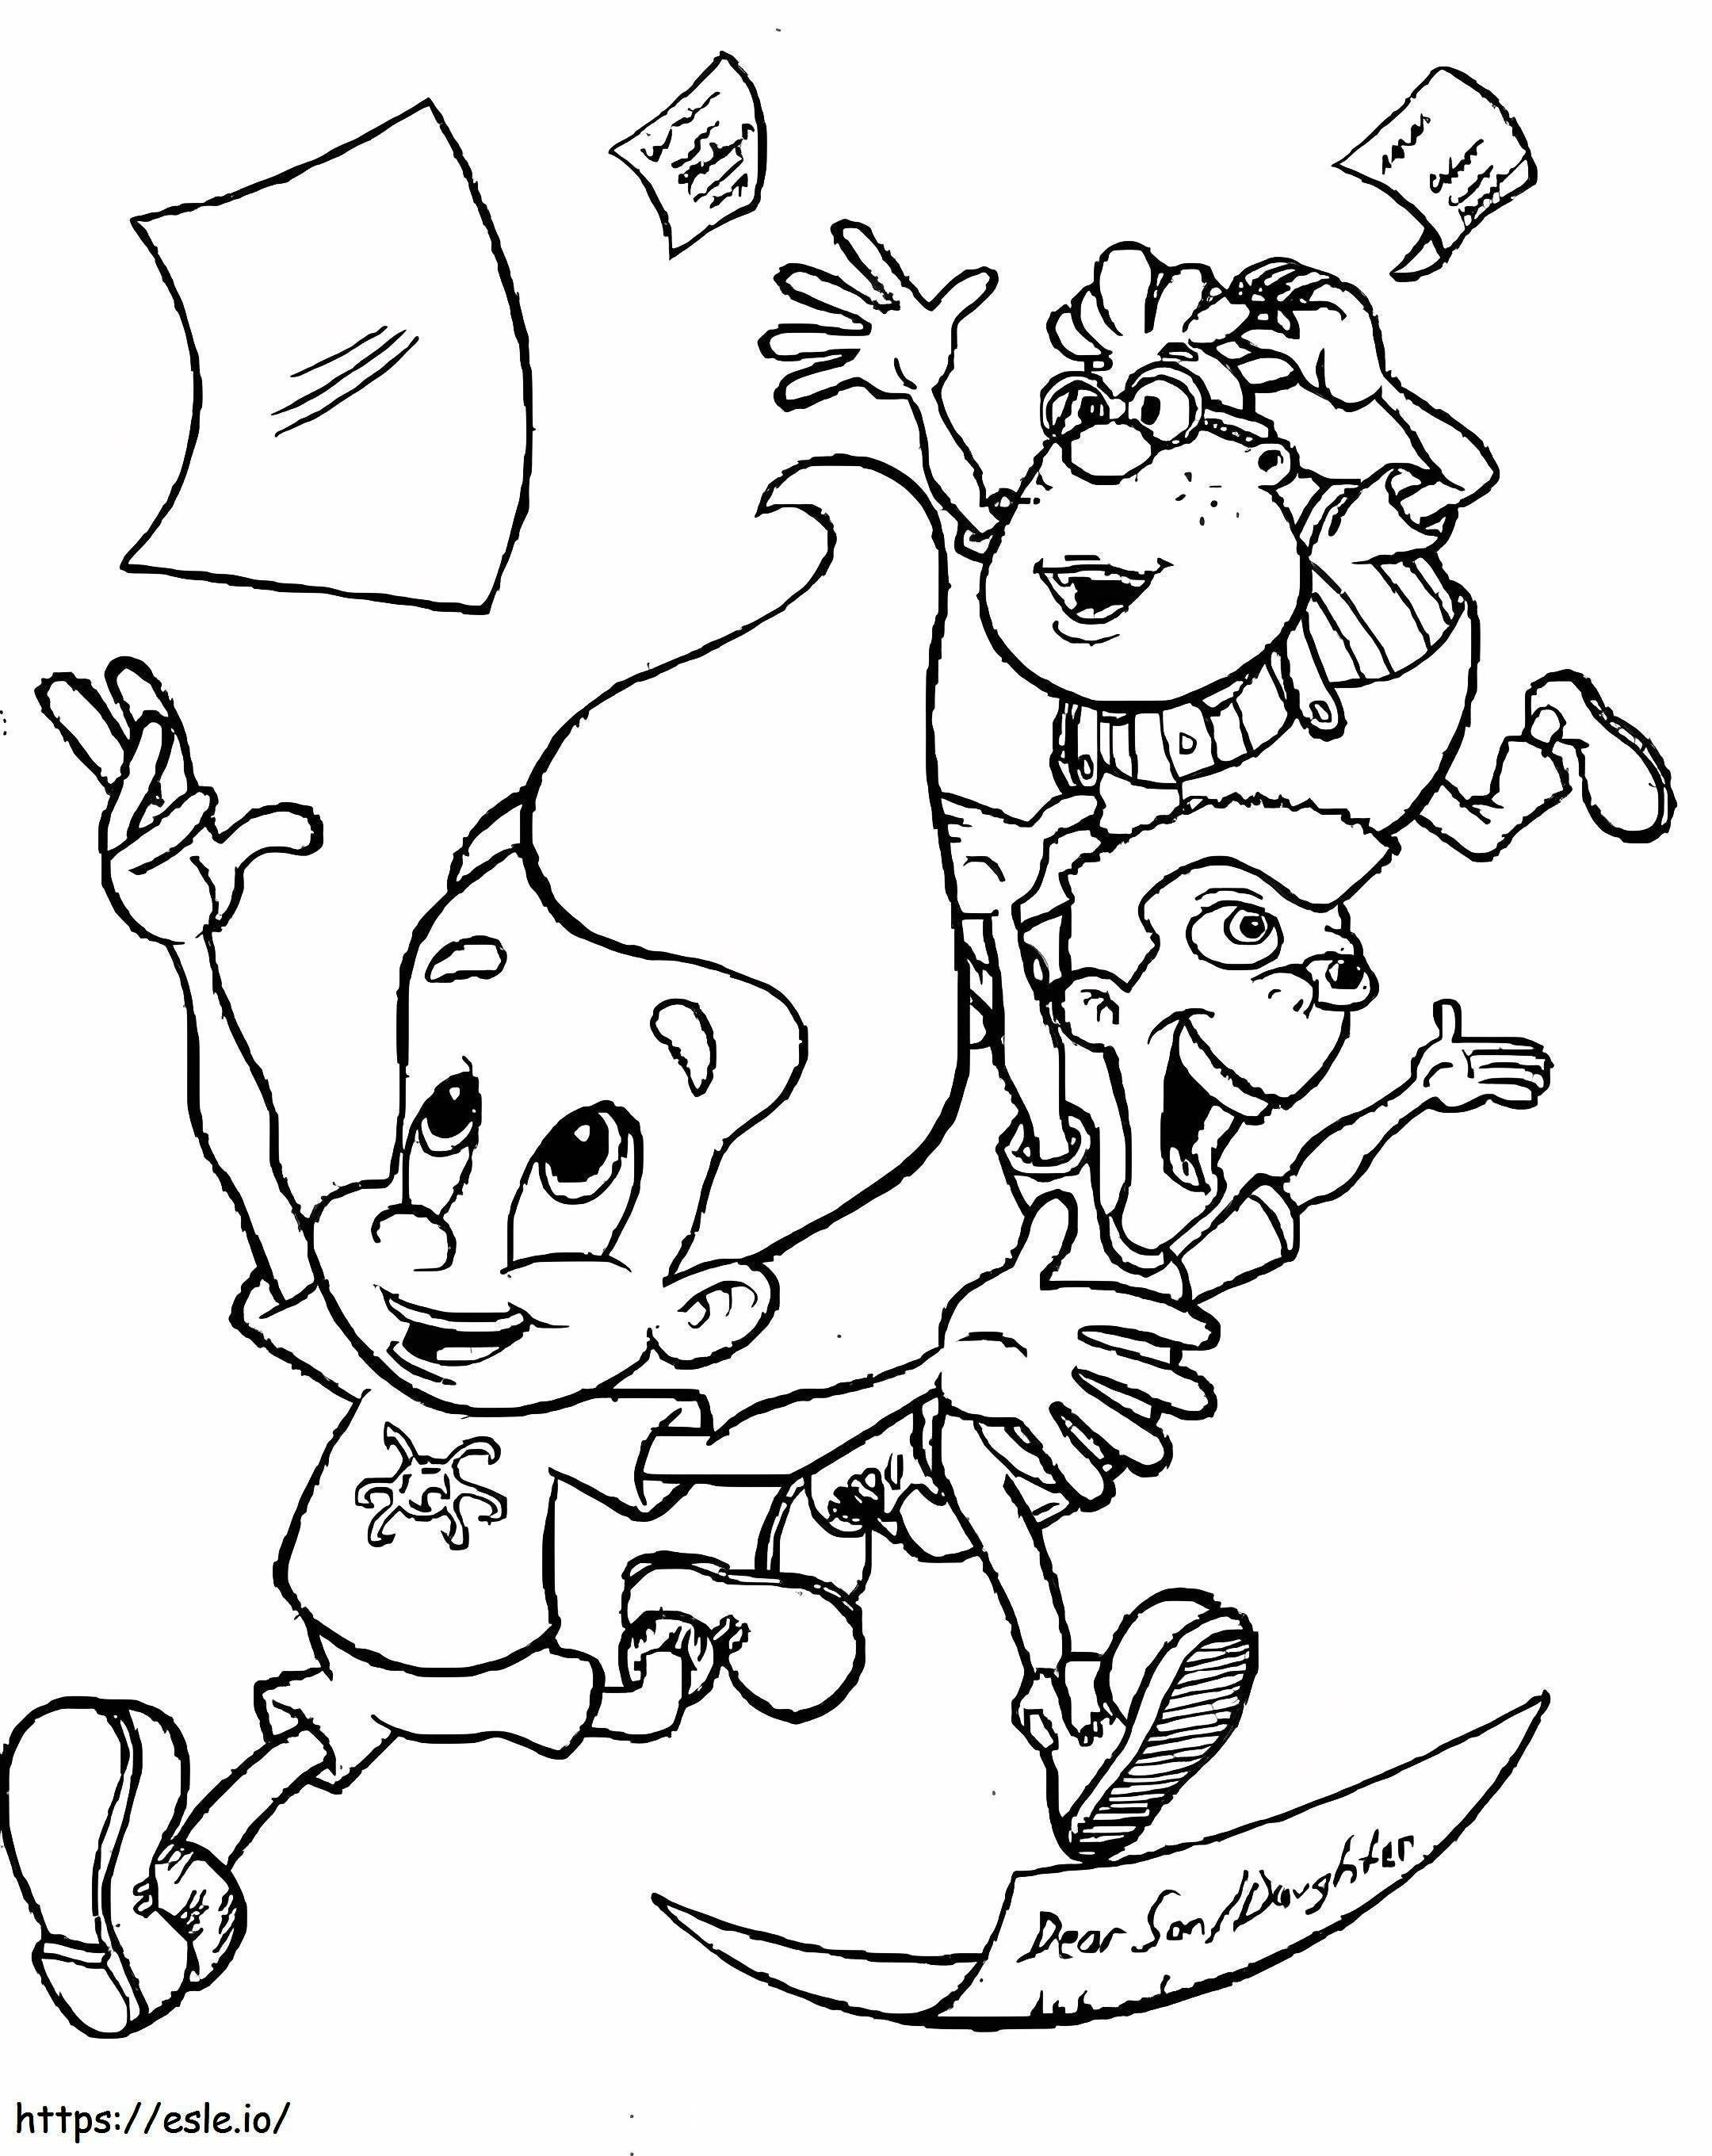 Jimmy Neutron And Friends coloring page